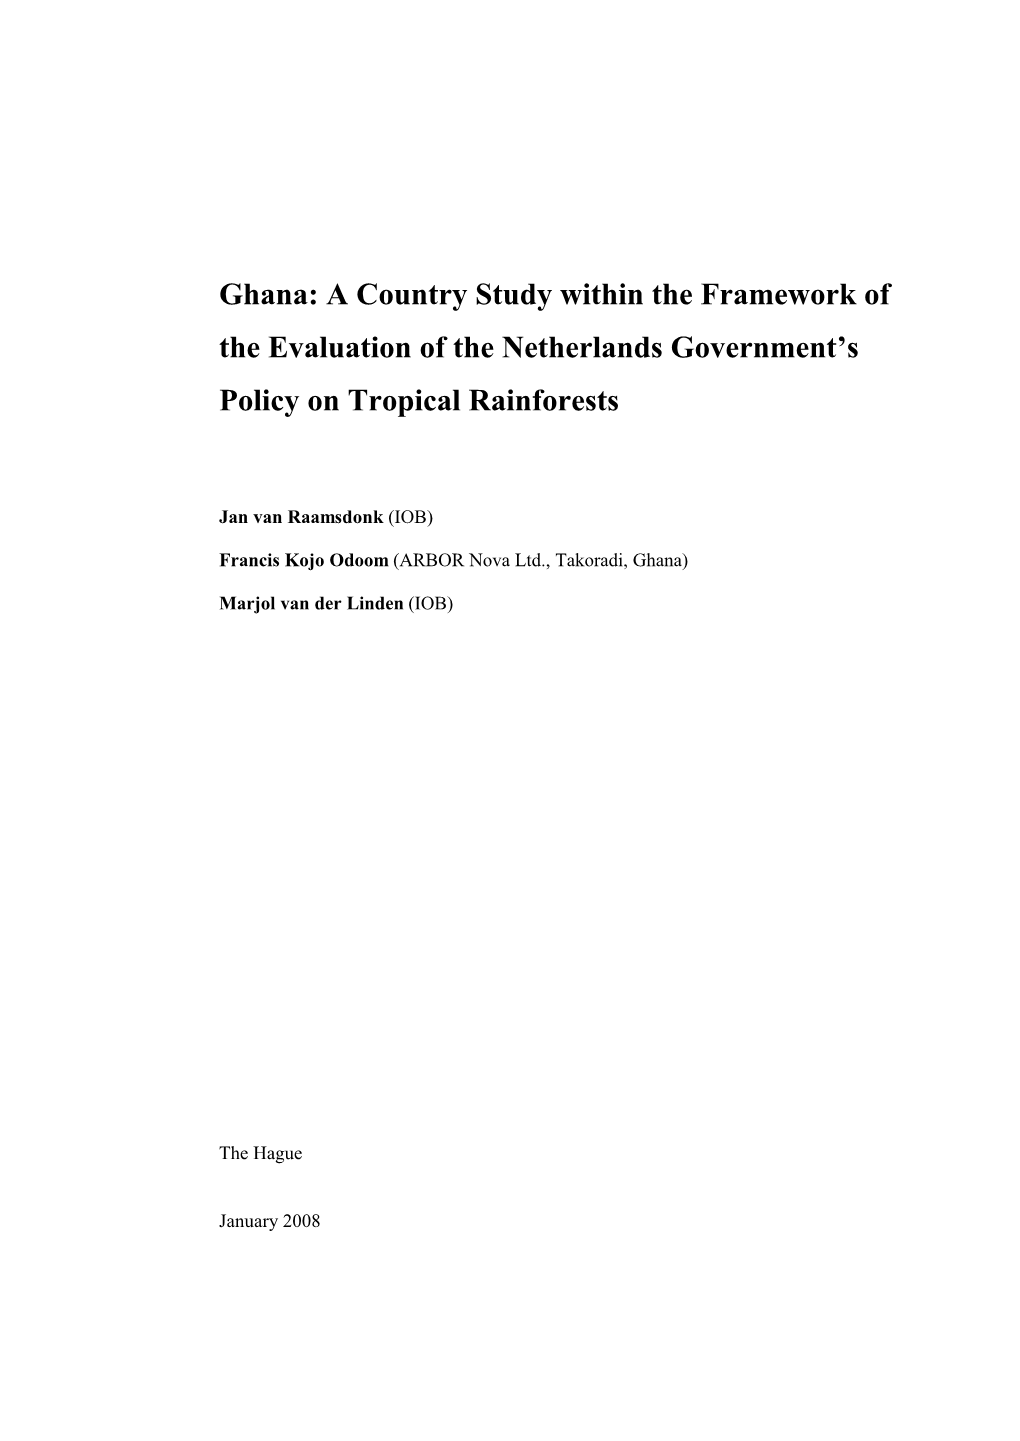 Ghana: a Country Study Within the Framework of the Evaluation of the Netherlands Government’S Policy on Tropical Rainforests